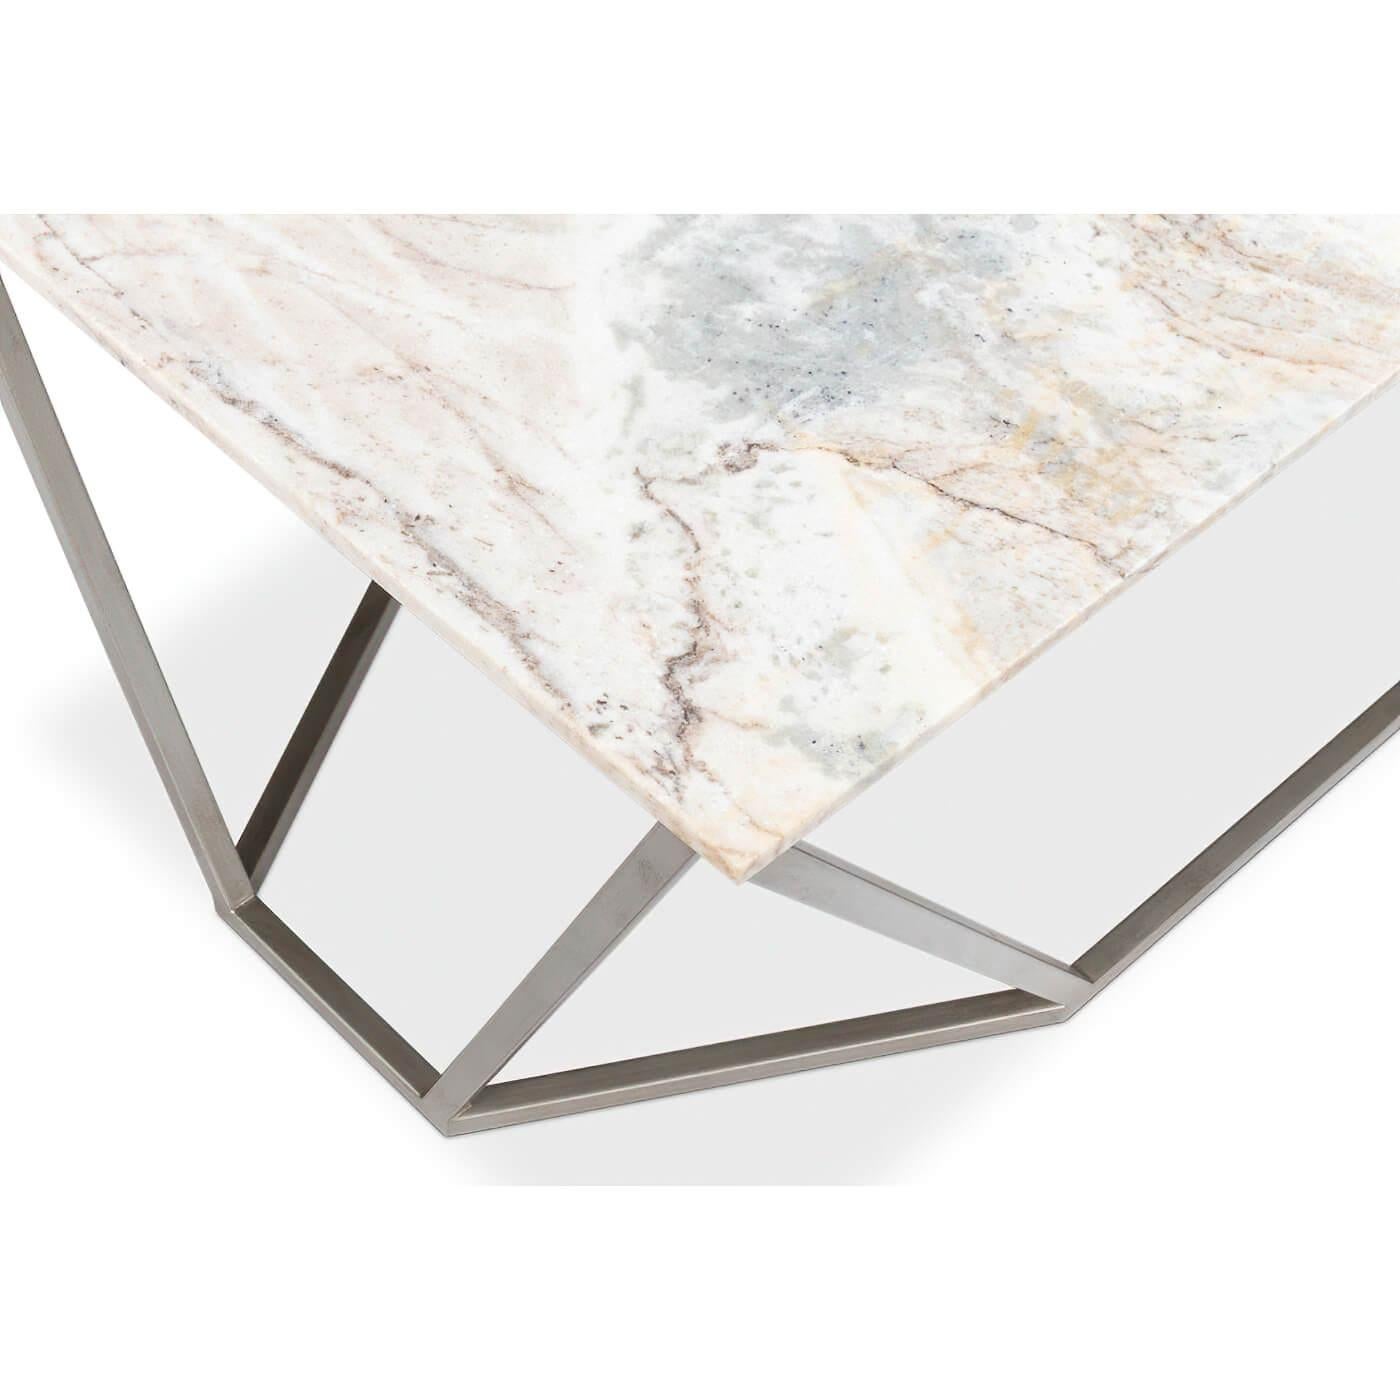 A modern trapezoid base coffee table with a marble top. This coffee table has a striking geometric design with a brushed silver metal base and a beautiful marble top with unique veining and color variations. 

Dimensions: 44